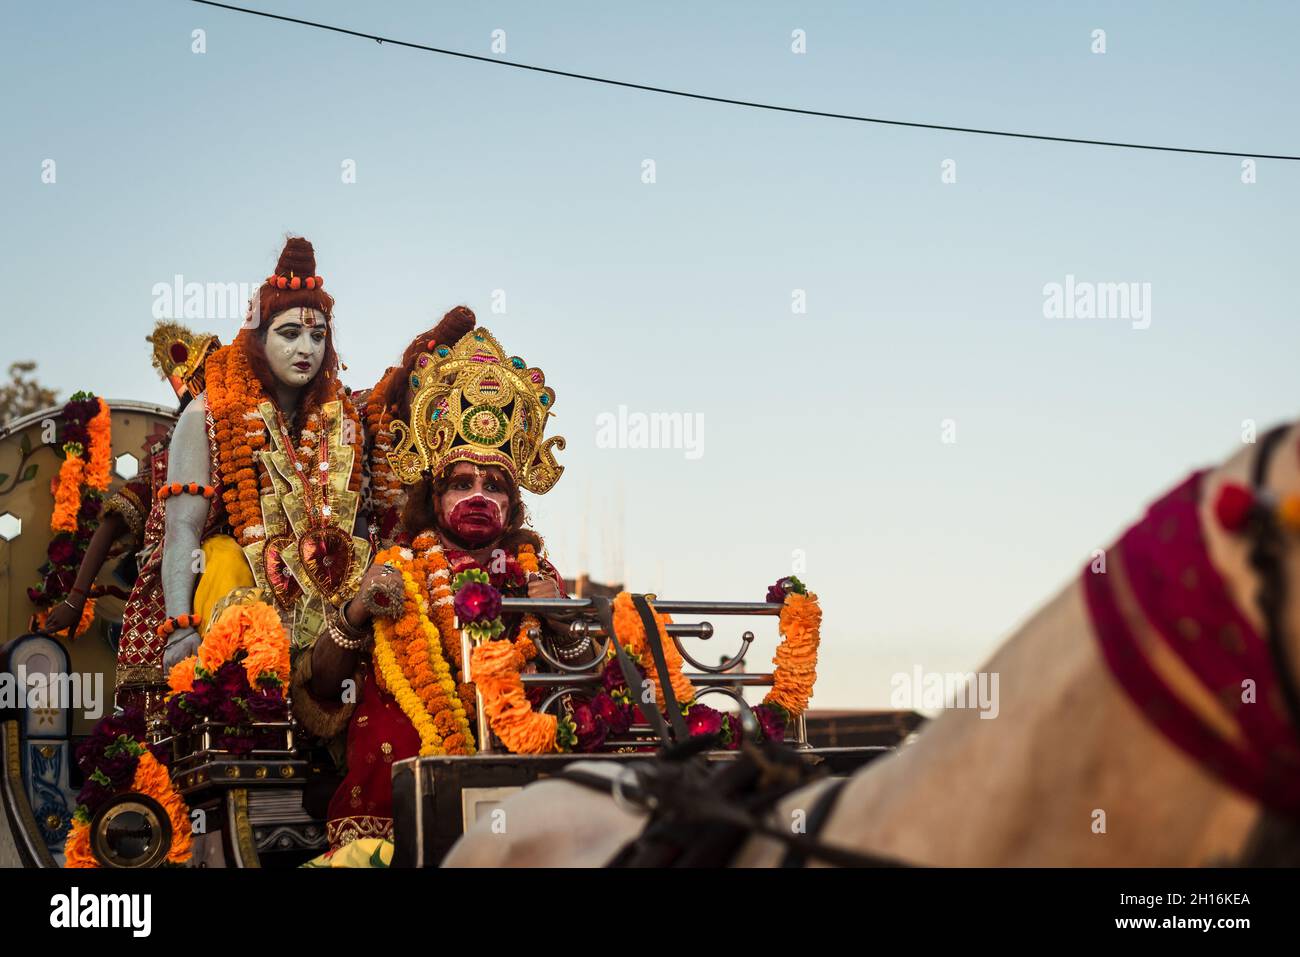 Lord Hanuman driving the Chariotte of Lord Ram during Ramleela in India Stock Photo